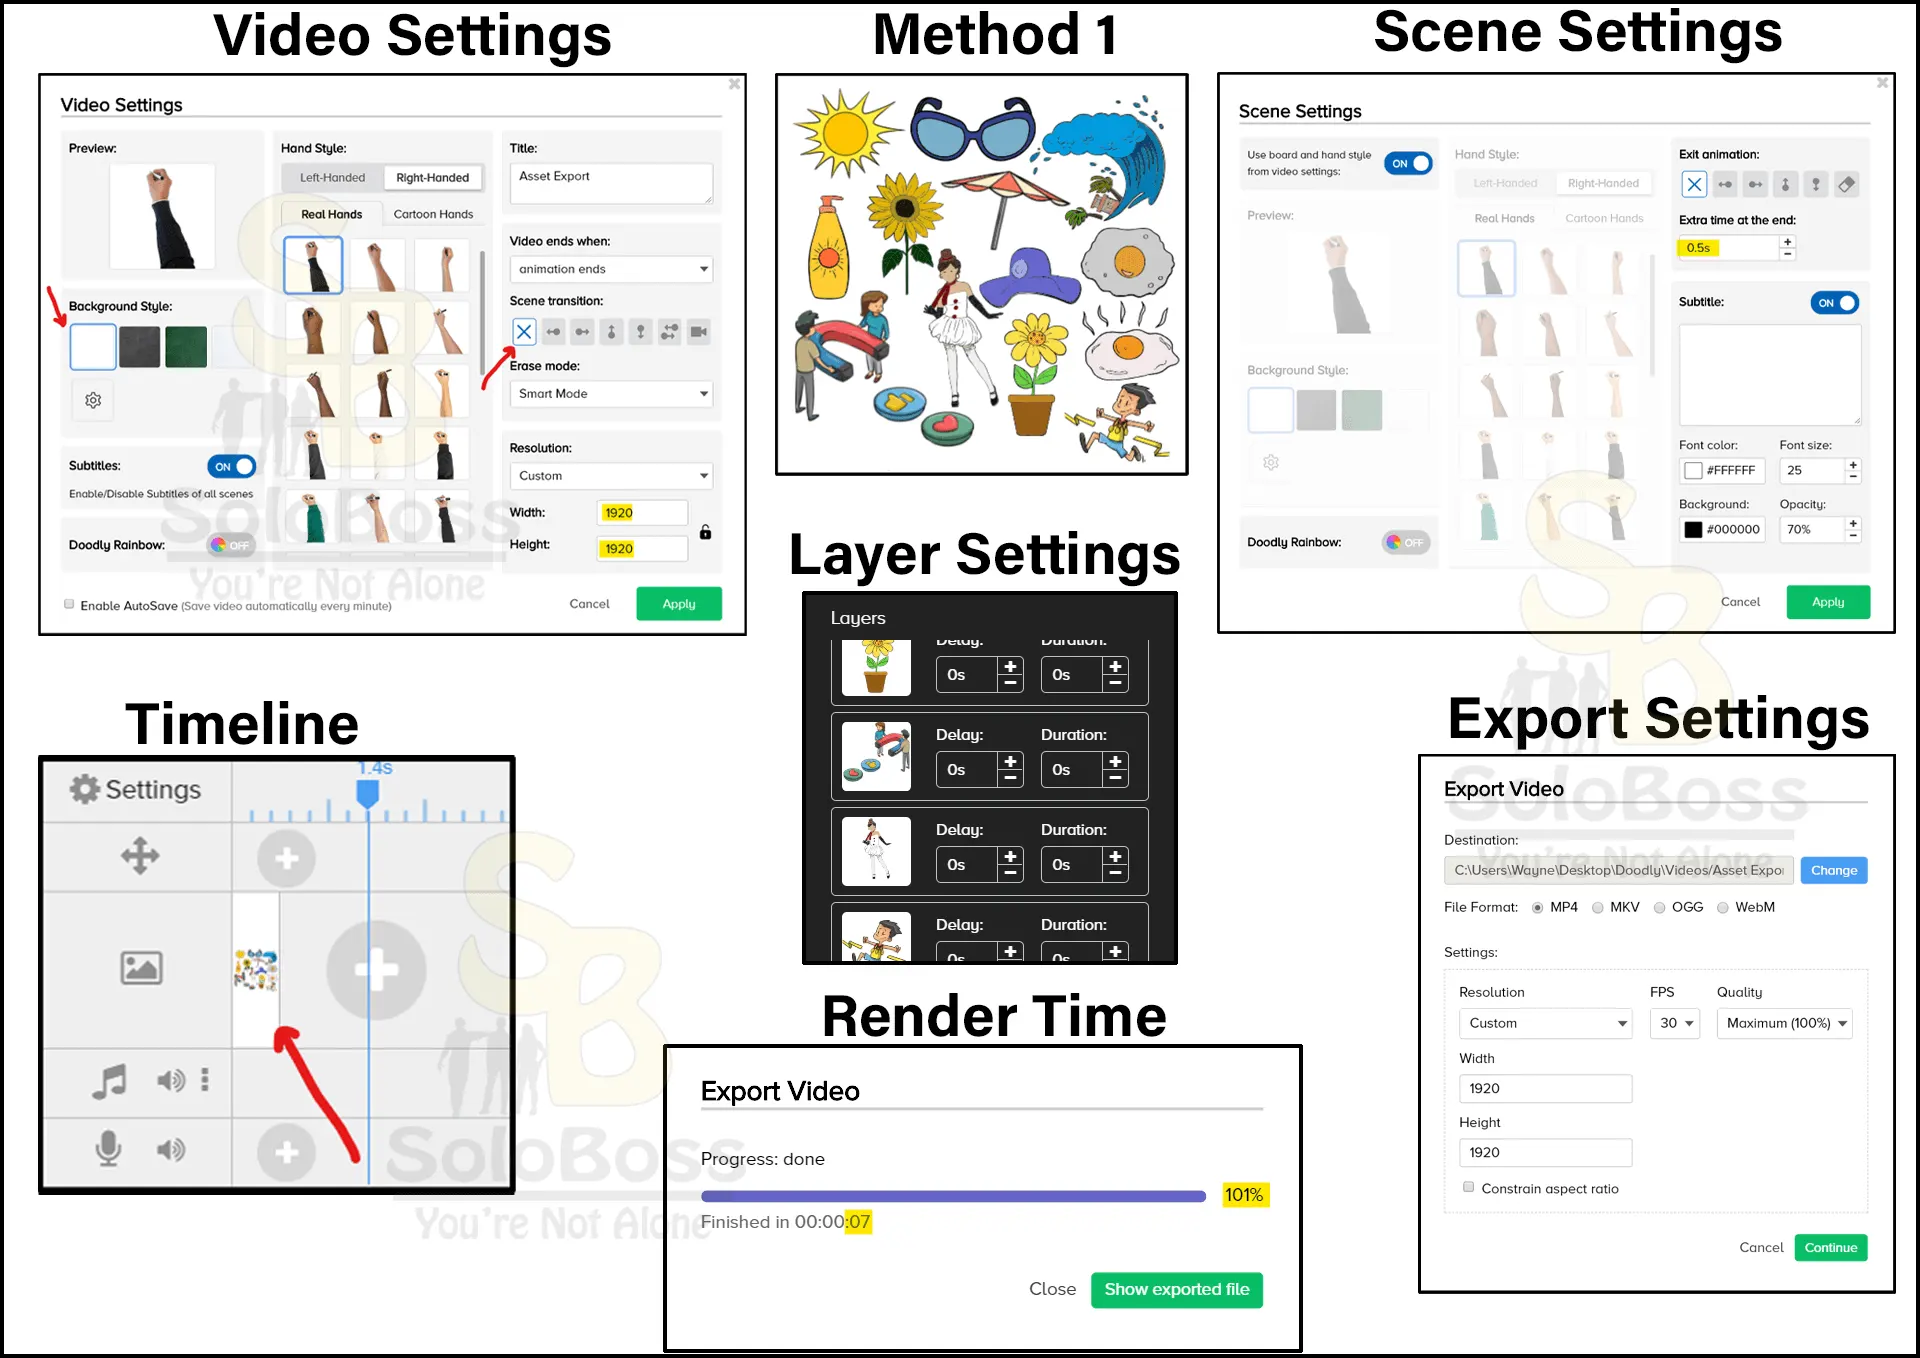 Displaying method one of combining all assets onto a single canvas layout and showing the settings to rapidly export Doodly assets out of Doodly.